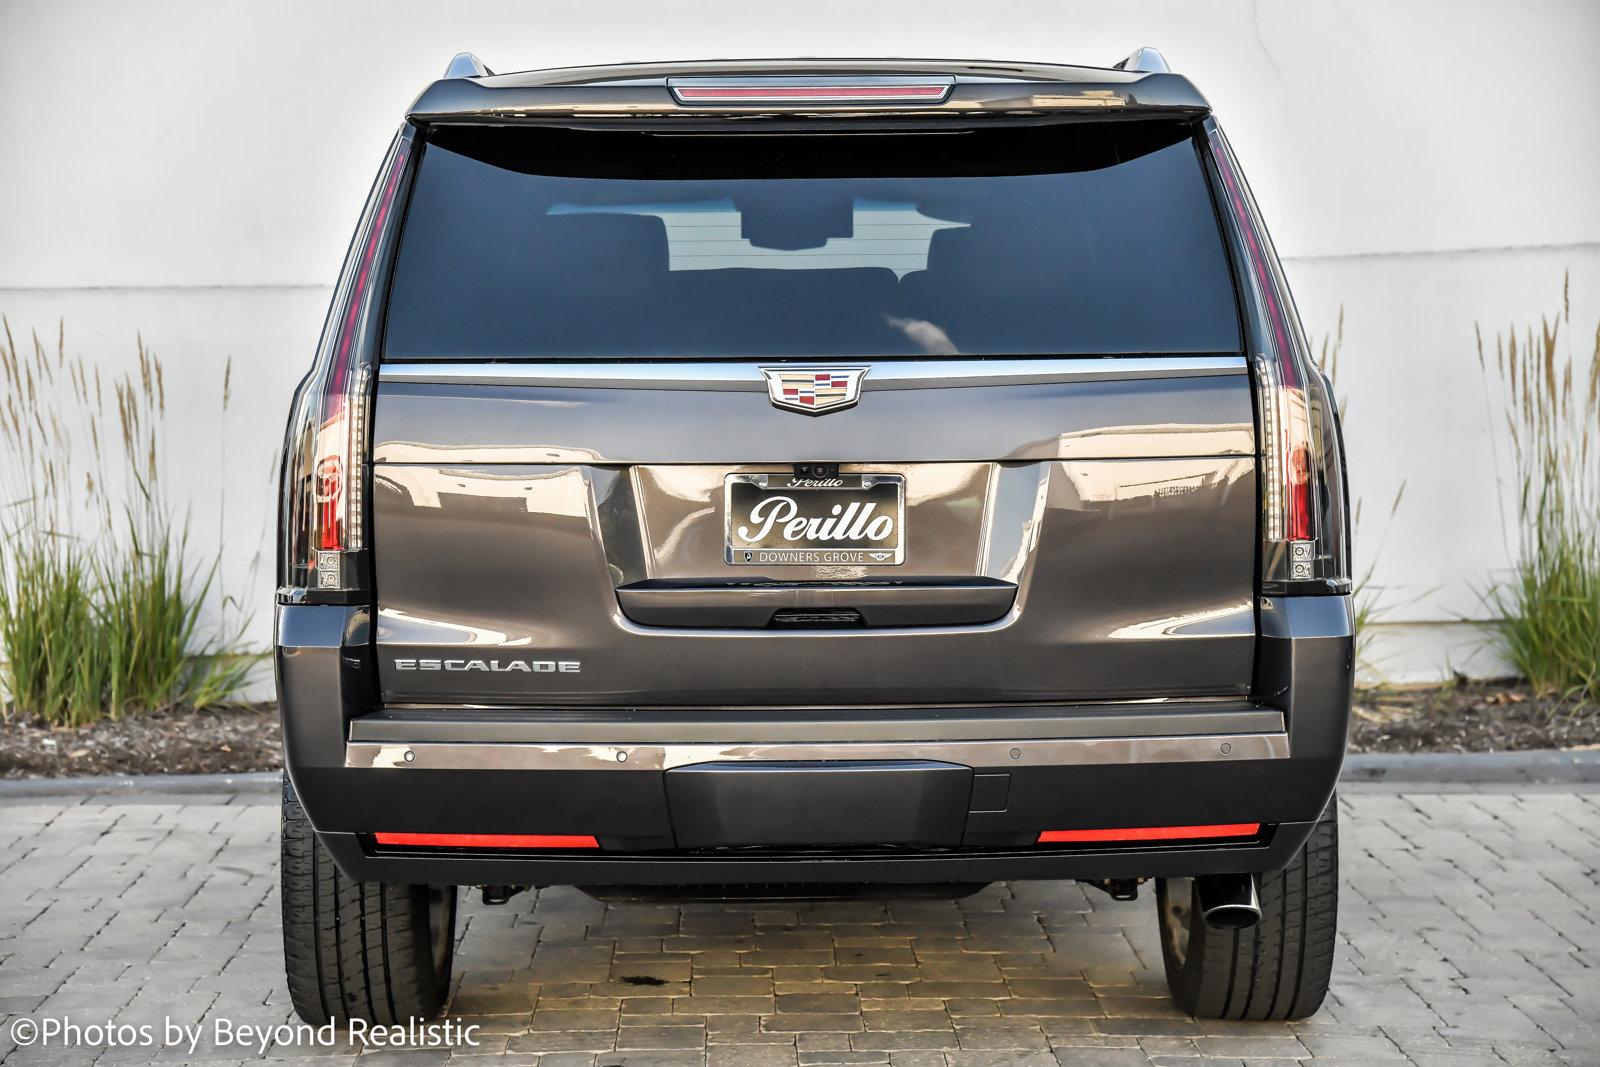 Used 2018 Cadillac Escalade Platinum, Rear Ent With Navigation | Downers Grove, IL